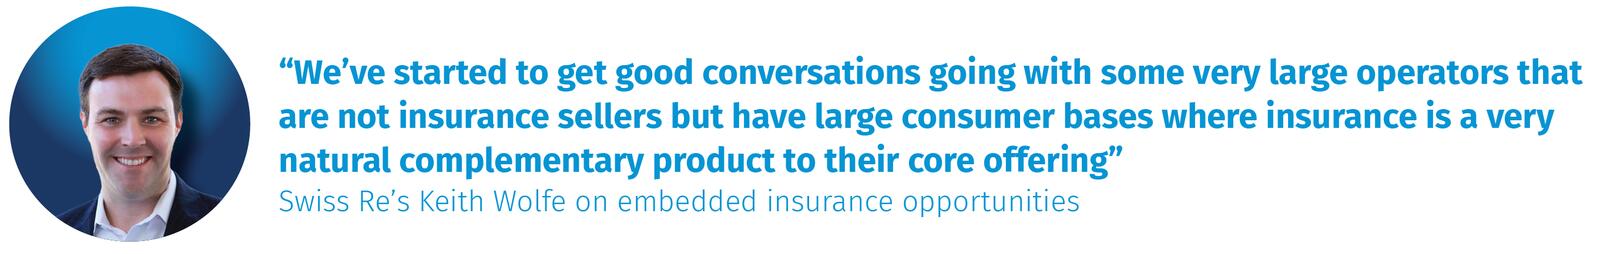 Swiss Re’s Keith Wolfe on embedded insurance opportunities 